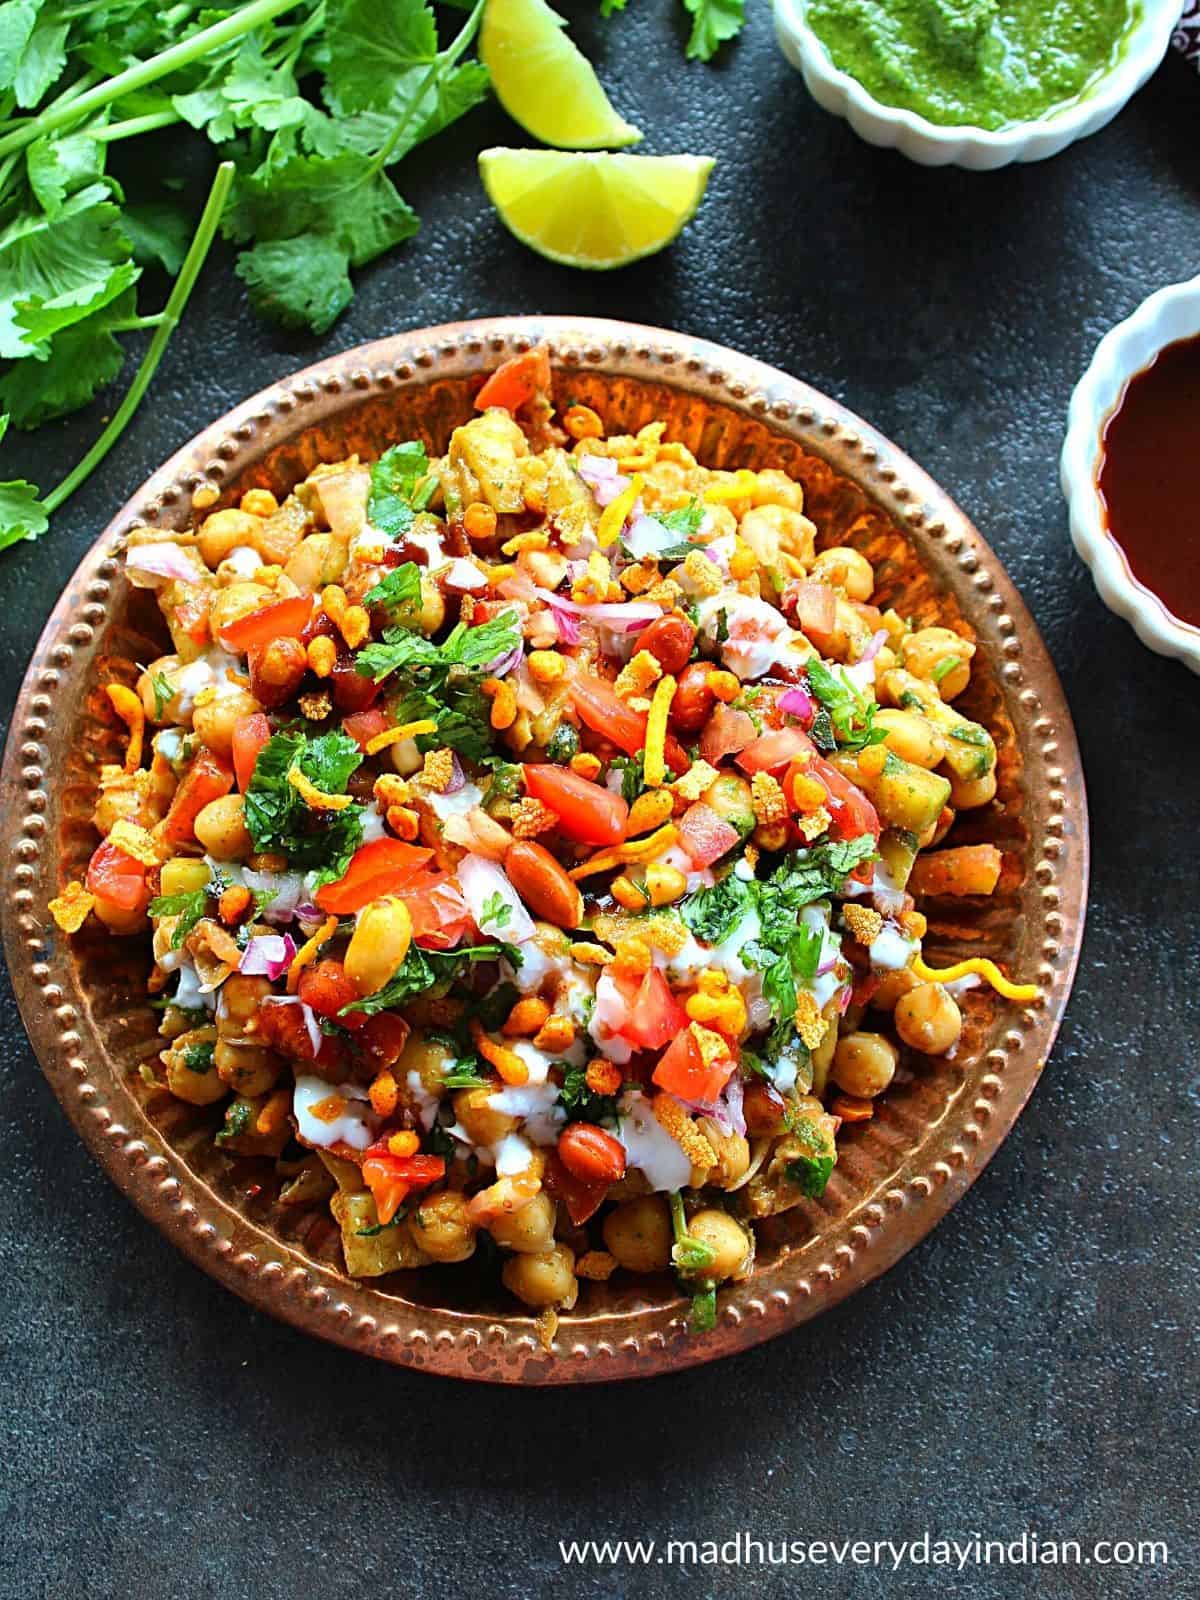 Chana Chaat | Chickpea Chaat - Madhu's Everyday Indian